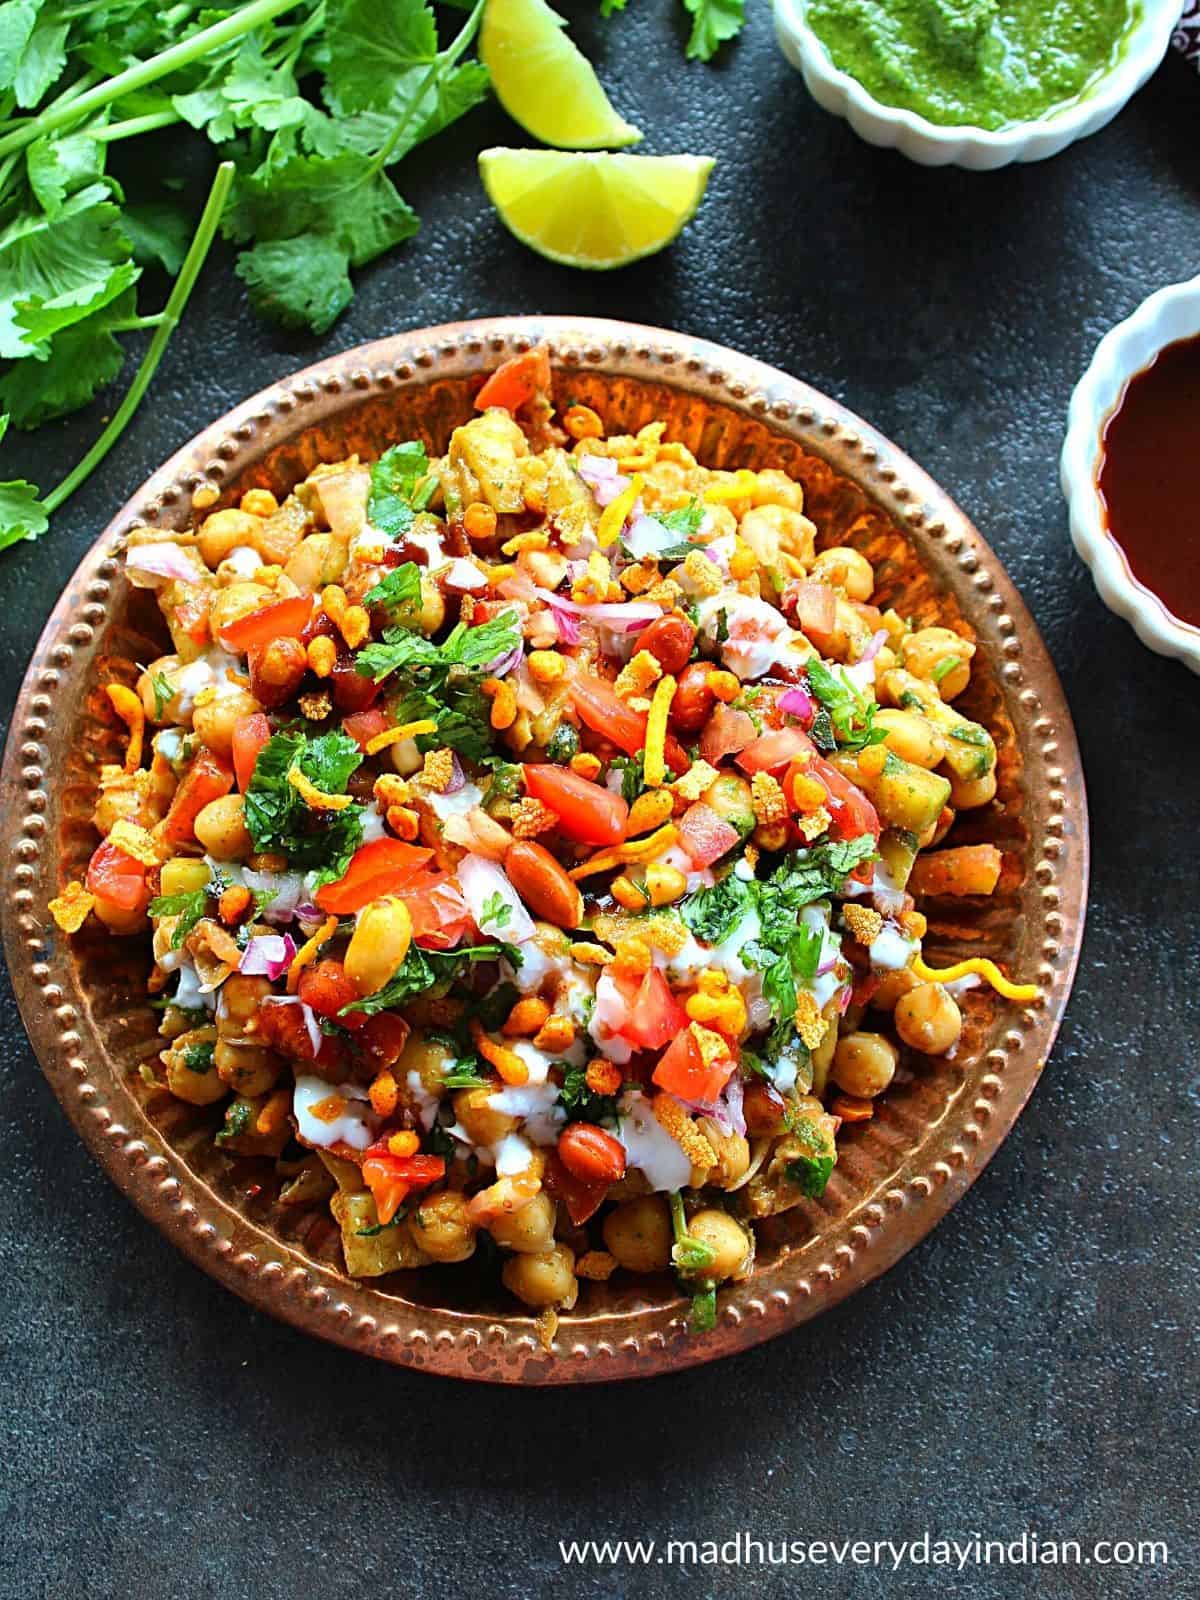 Chana Chaat | Chickpea Chaat - Madhu's Everyday Indian